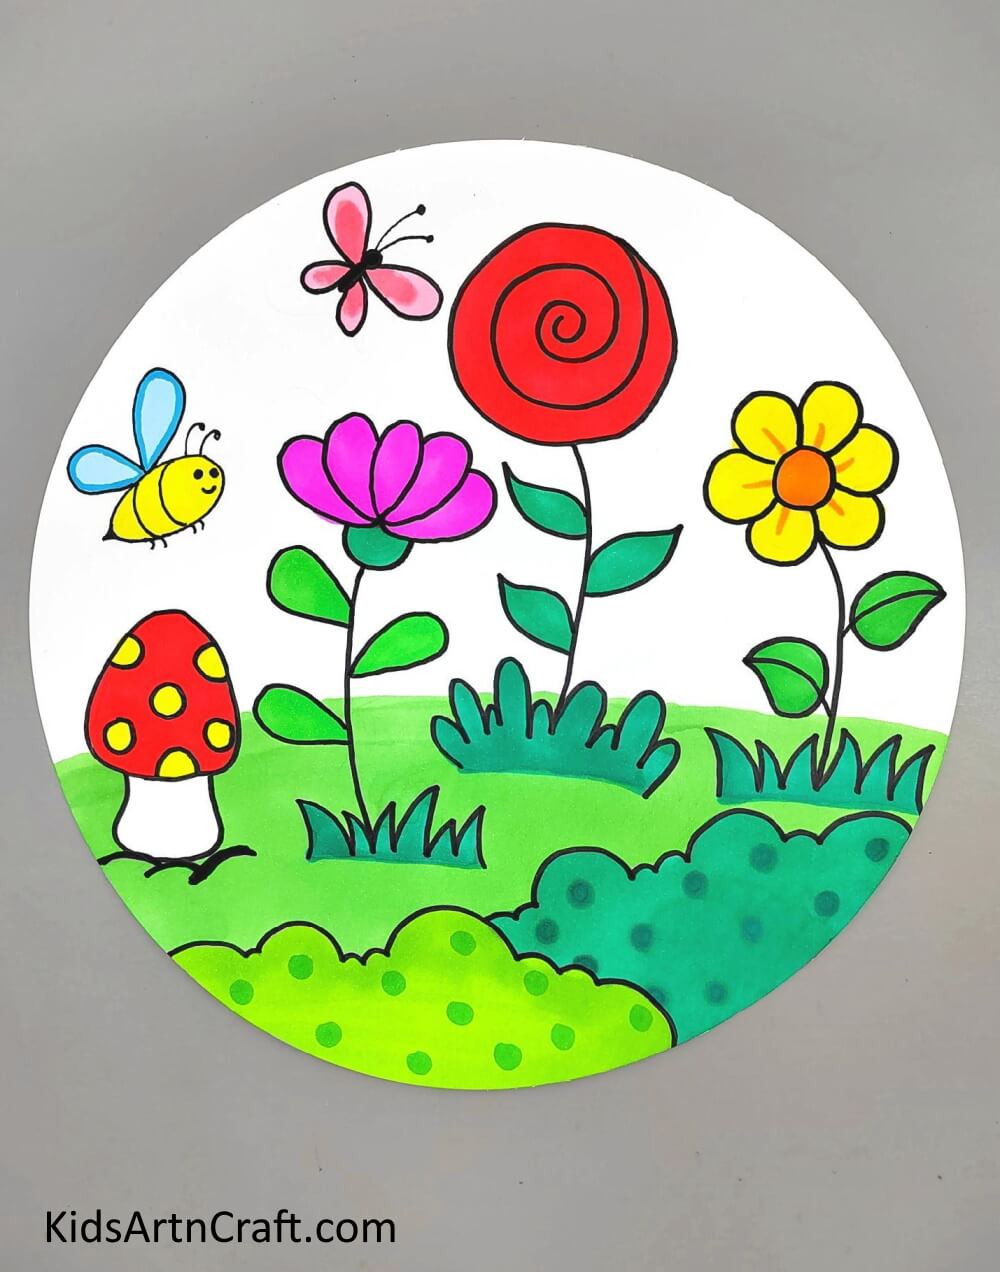 Coloring The Drawing Become adept at drawing a flower garden picture for little ones